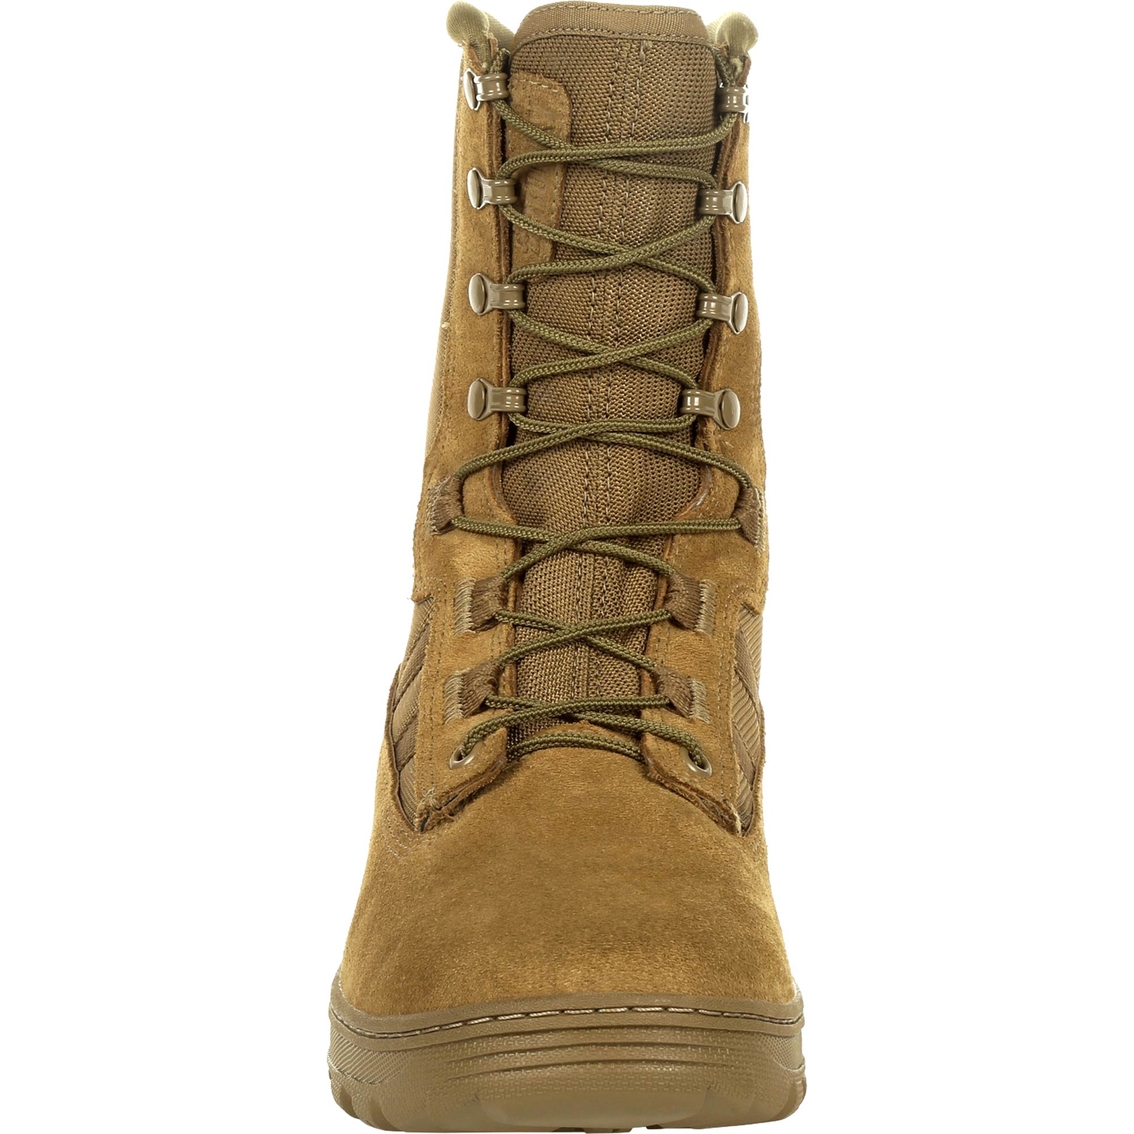 Rocky Havoc Commercial Military Boots - Image 5 of 7